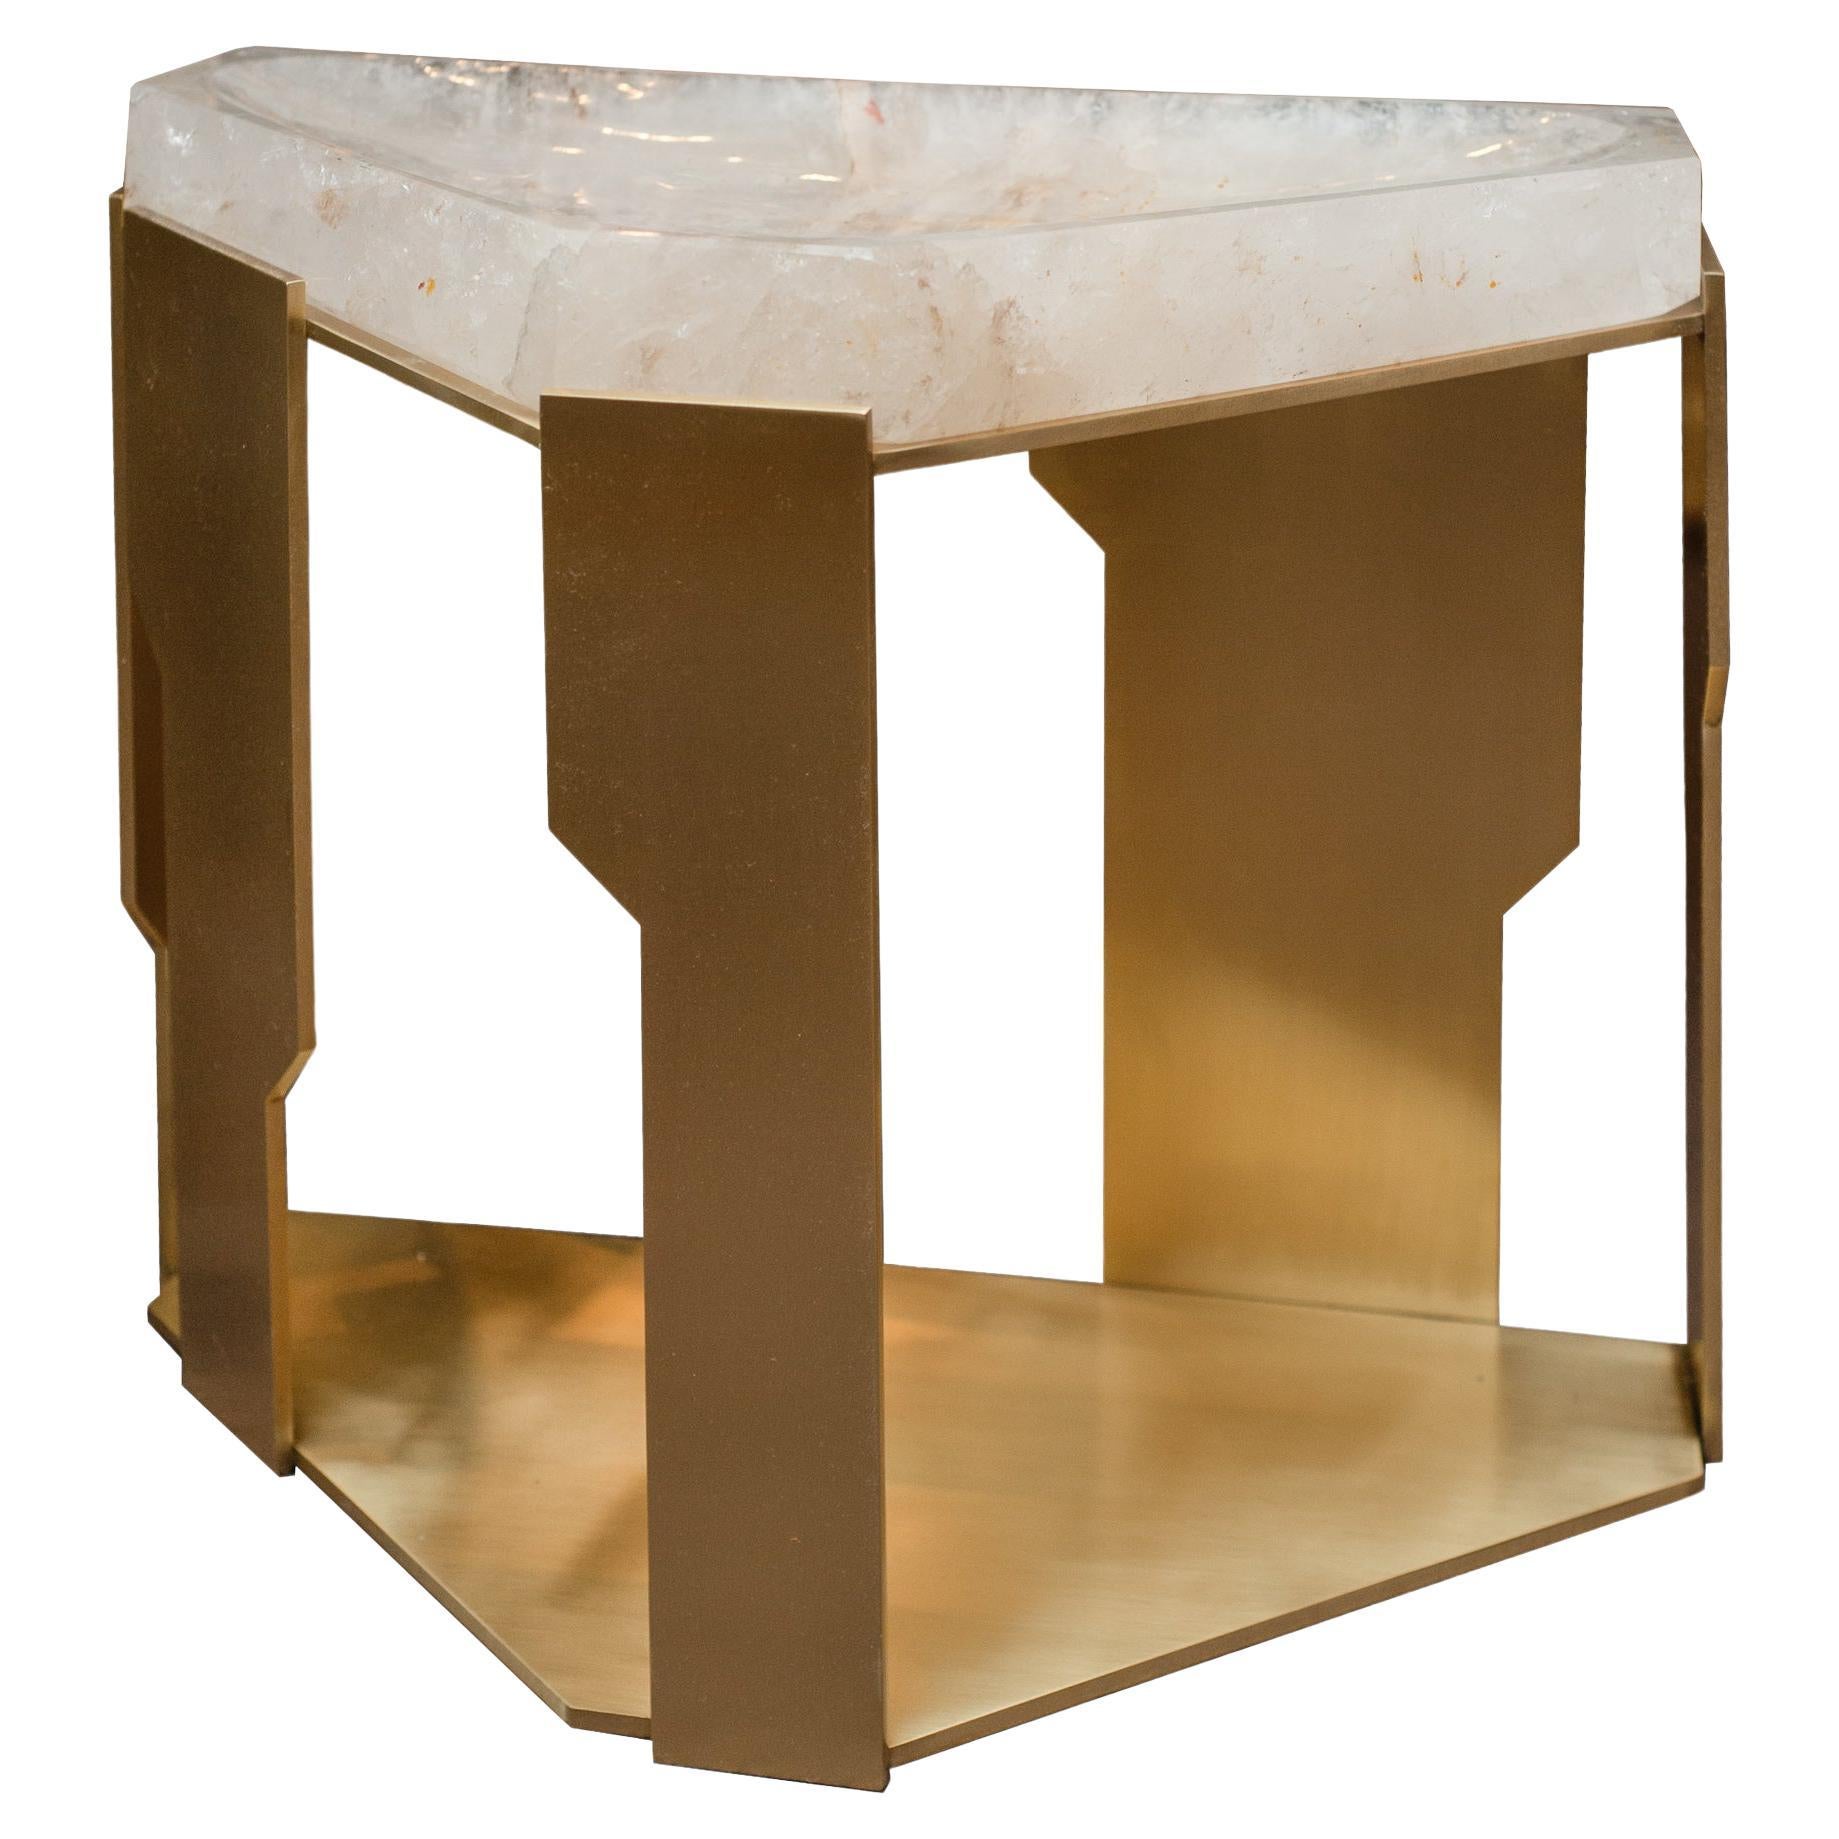 Contemporary Rock Crystal and Brass Table with Geometric Base